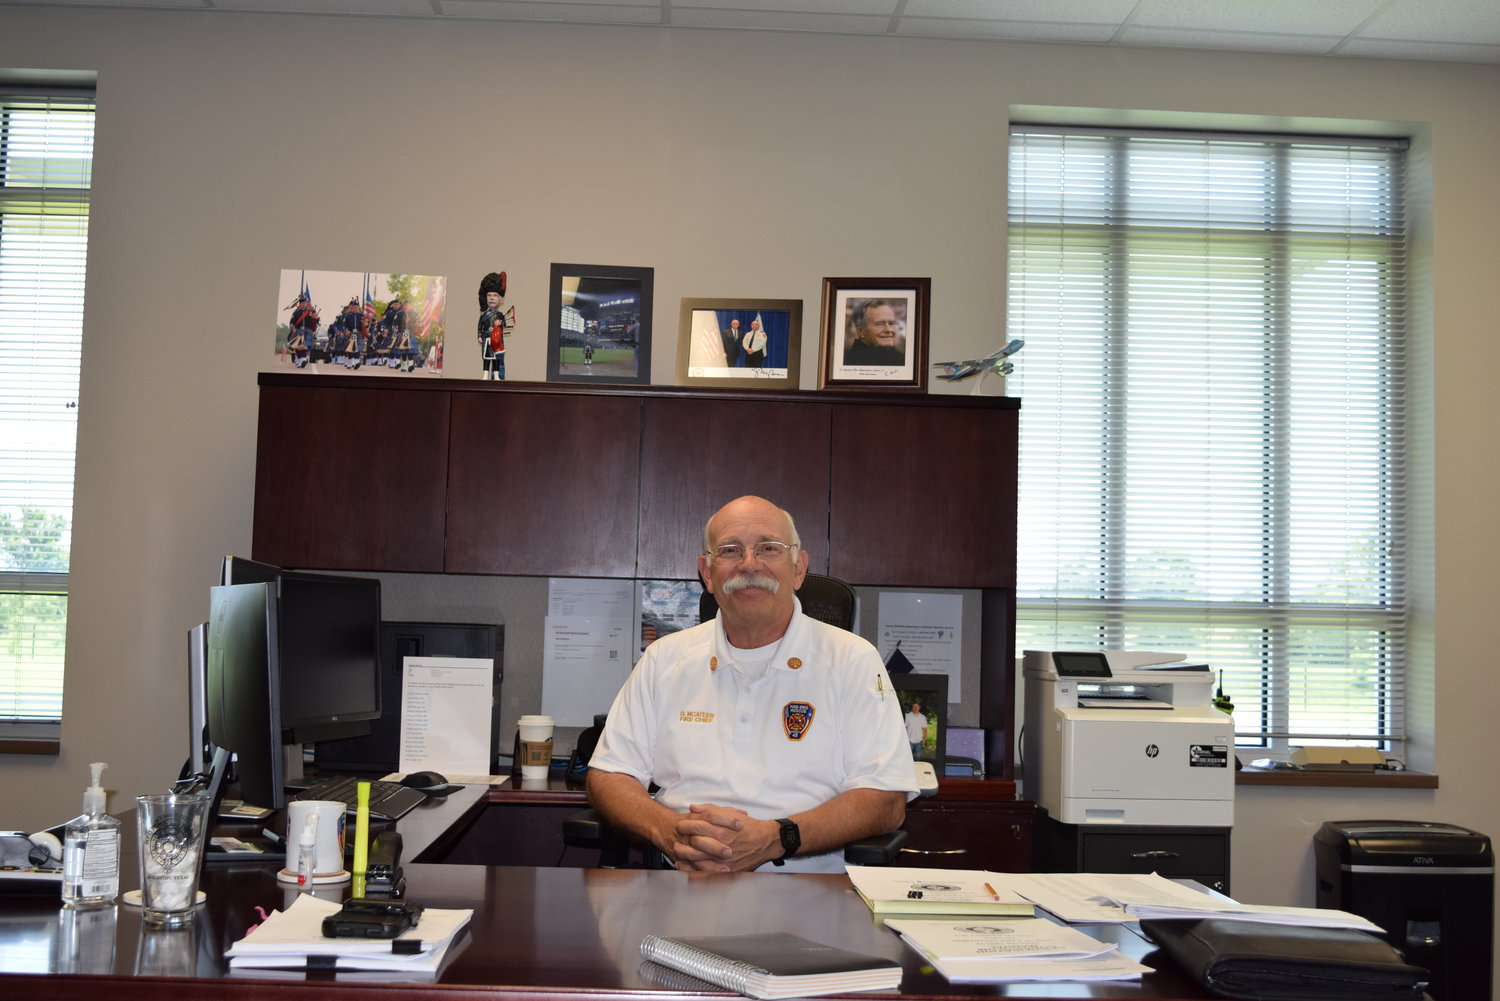 McAteer said he is still settling into his new role at HCESD 48 and has a lot of assessment to do on the department to see what he wants to maintain and what he wants to improve upon. He said he is already very impressed with the department as a whole and is excited to serve the community he lives in.